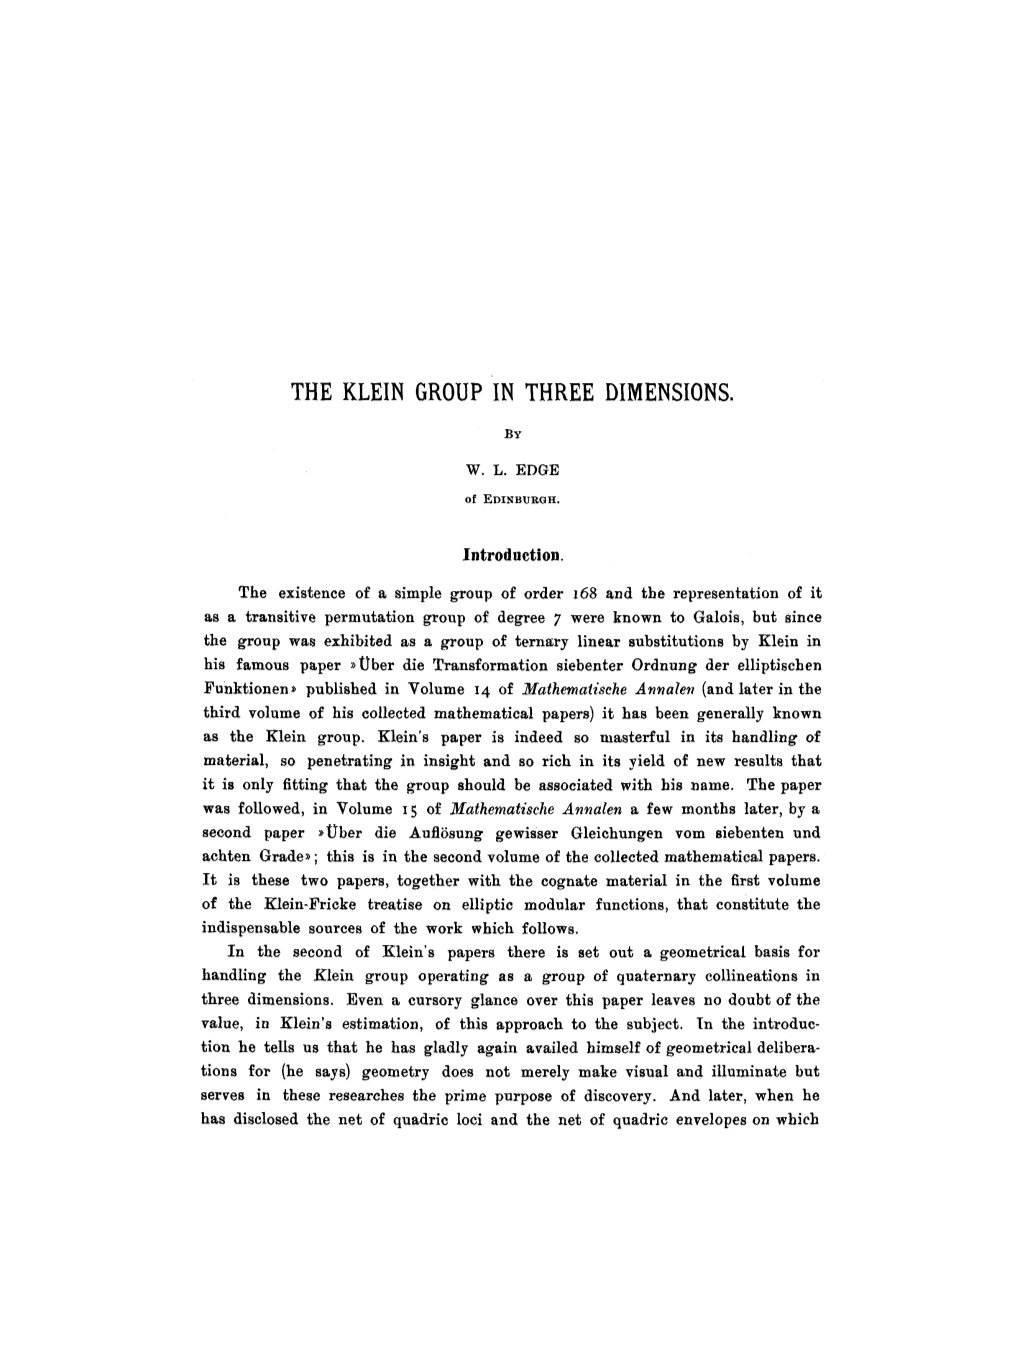 The Klein Group in Three Dimensions